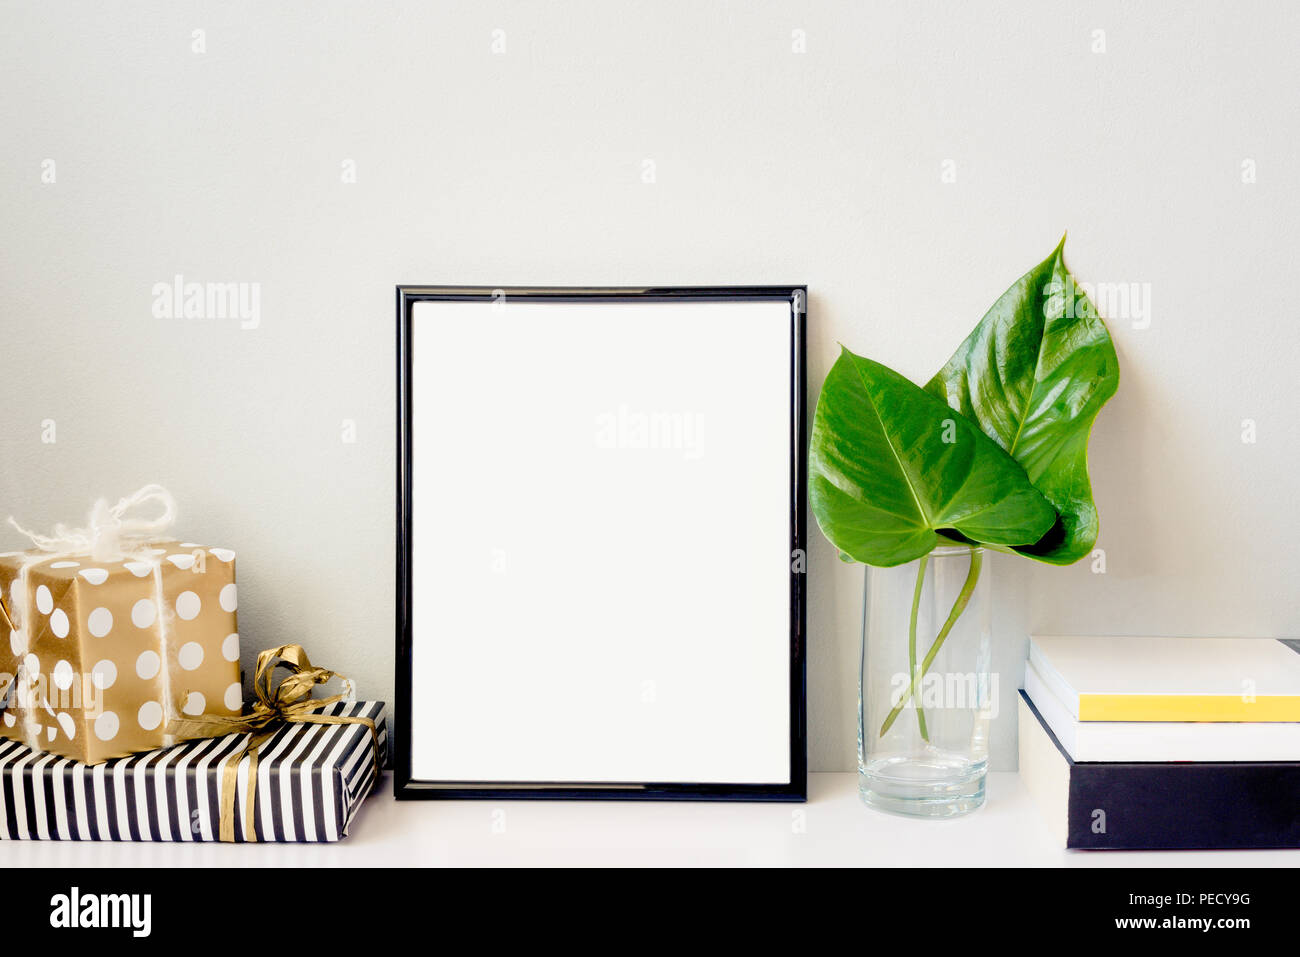 Black photo frame, green plant in a chrystal vase, gift boxes and a pile of books arranged against emty grey wall. Frame mock-up. Stock Photo